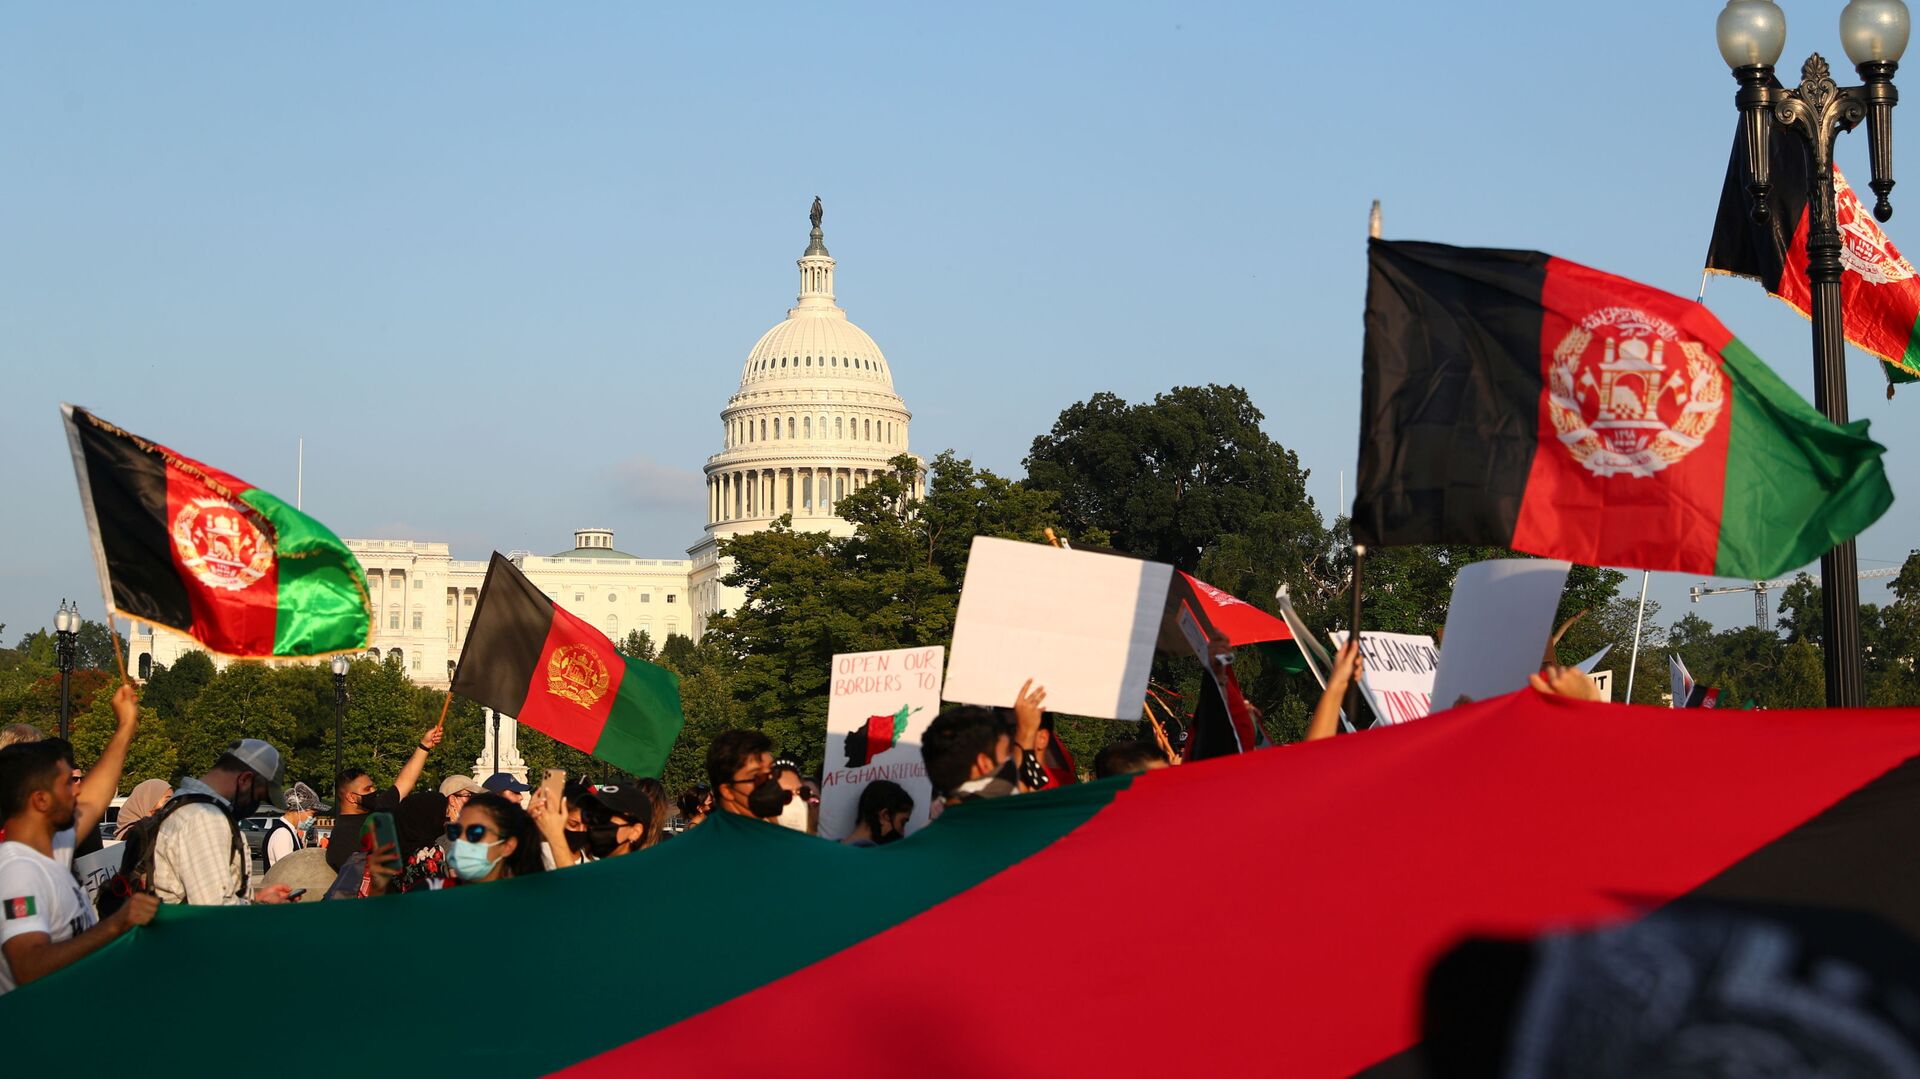 Protestors holding Afghanistan flags take part in a demonstration challenging the transparency of the evacuation process from Kabul Airport, near the U.S. Capitol, in Washington, U.S., August 28, 2021. REUTERS/Tom Brenner - Sputnik International, 1920, 07.09.2021